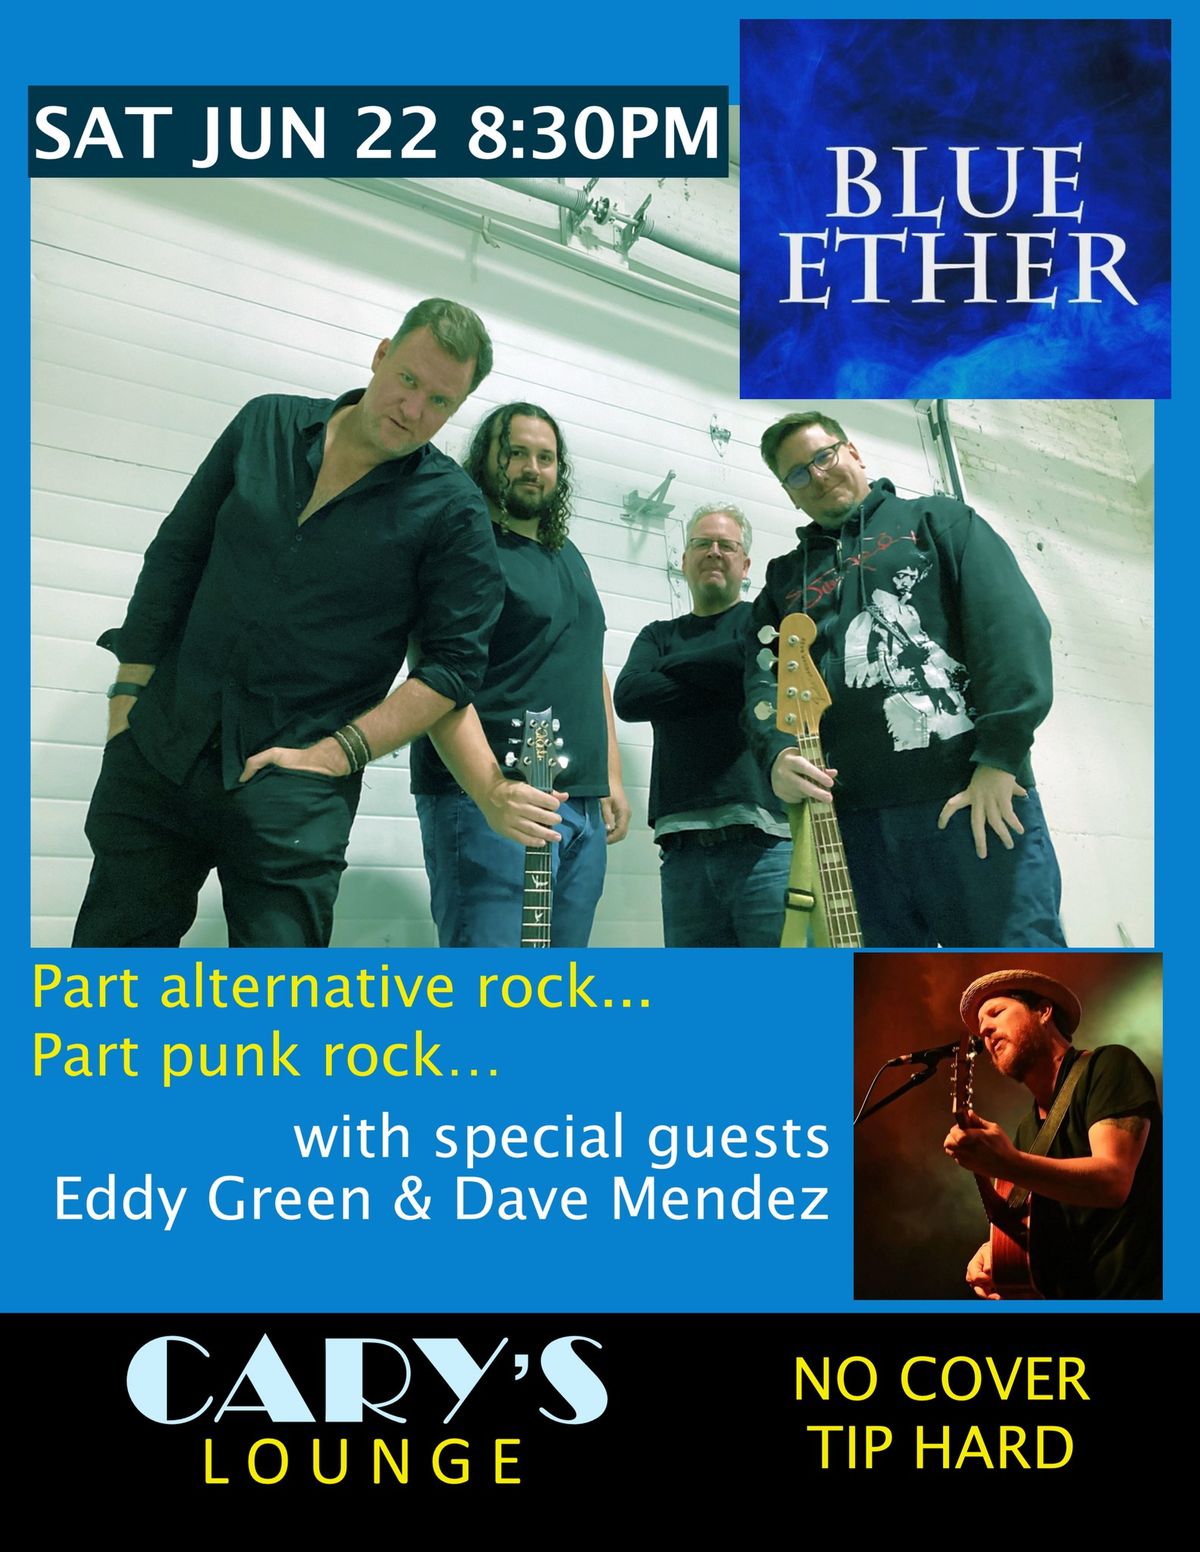 Blue Ether w\/ guests Eddy Green & Dave Mendez at Cary's Lounge